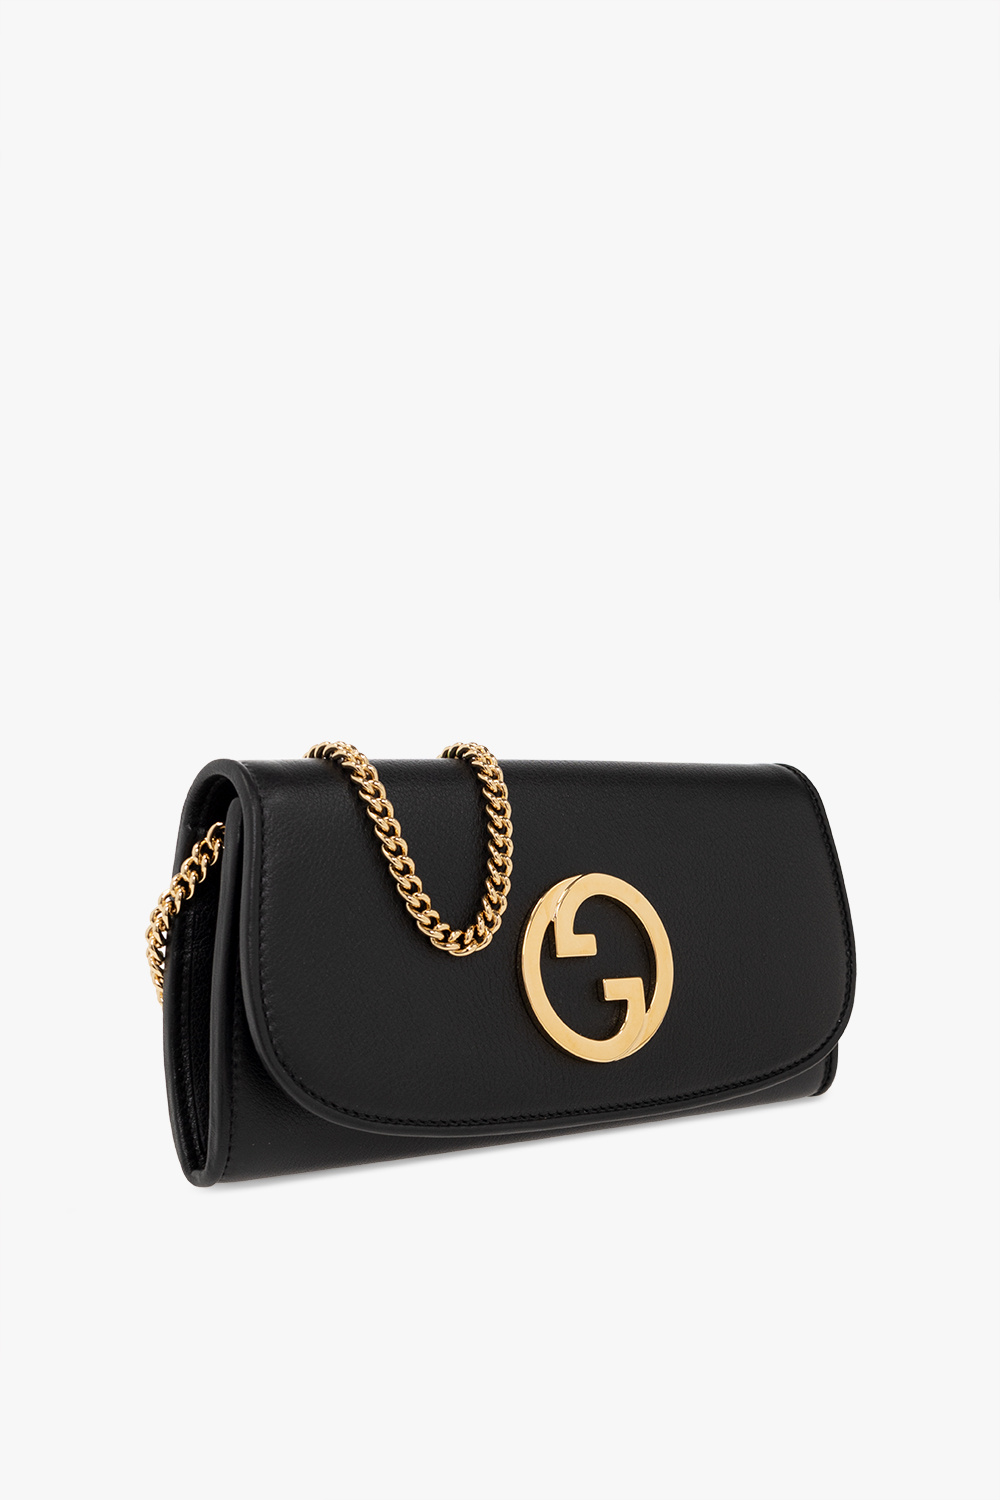 Gucci Blondie continental chain wallet in black leather